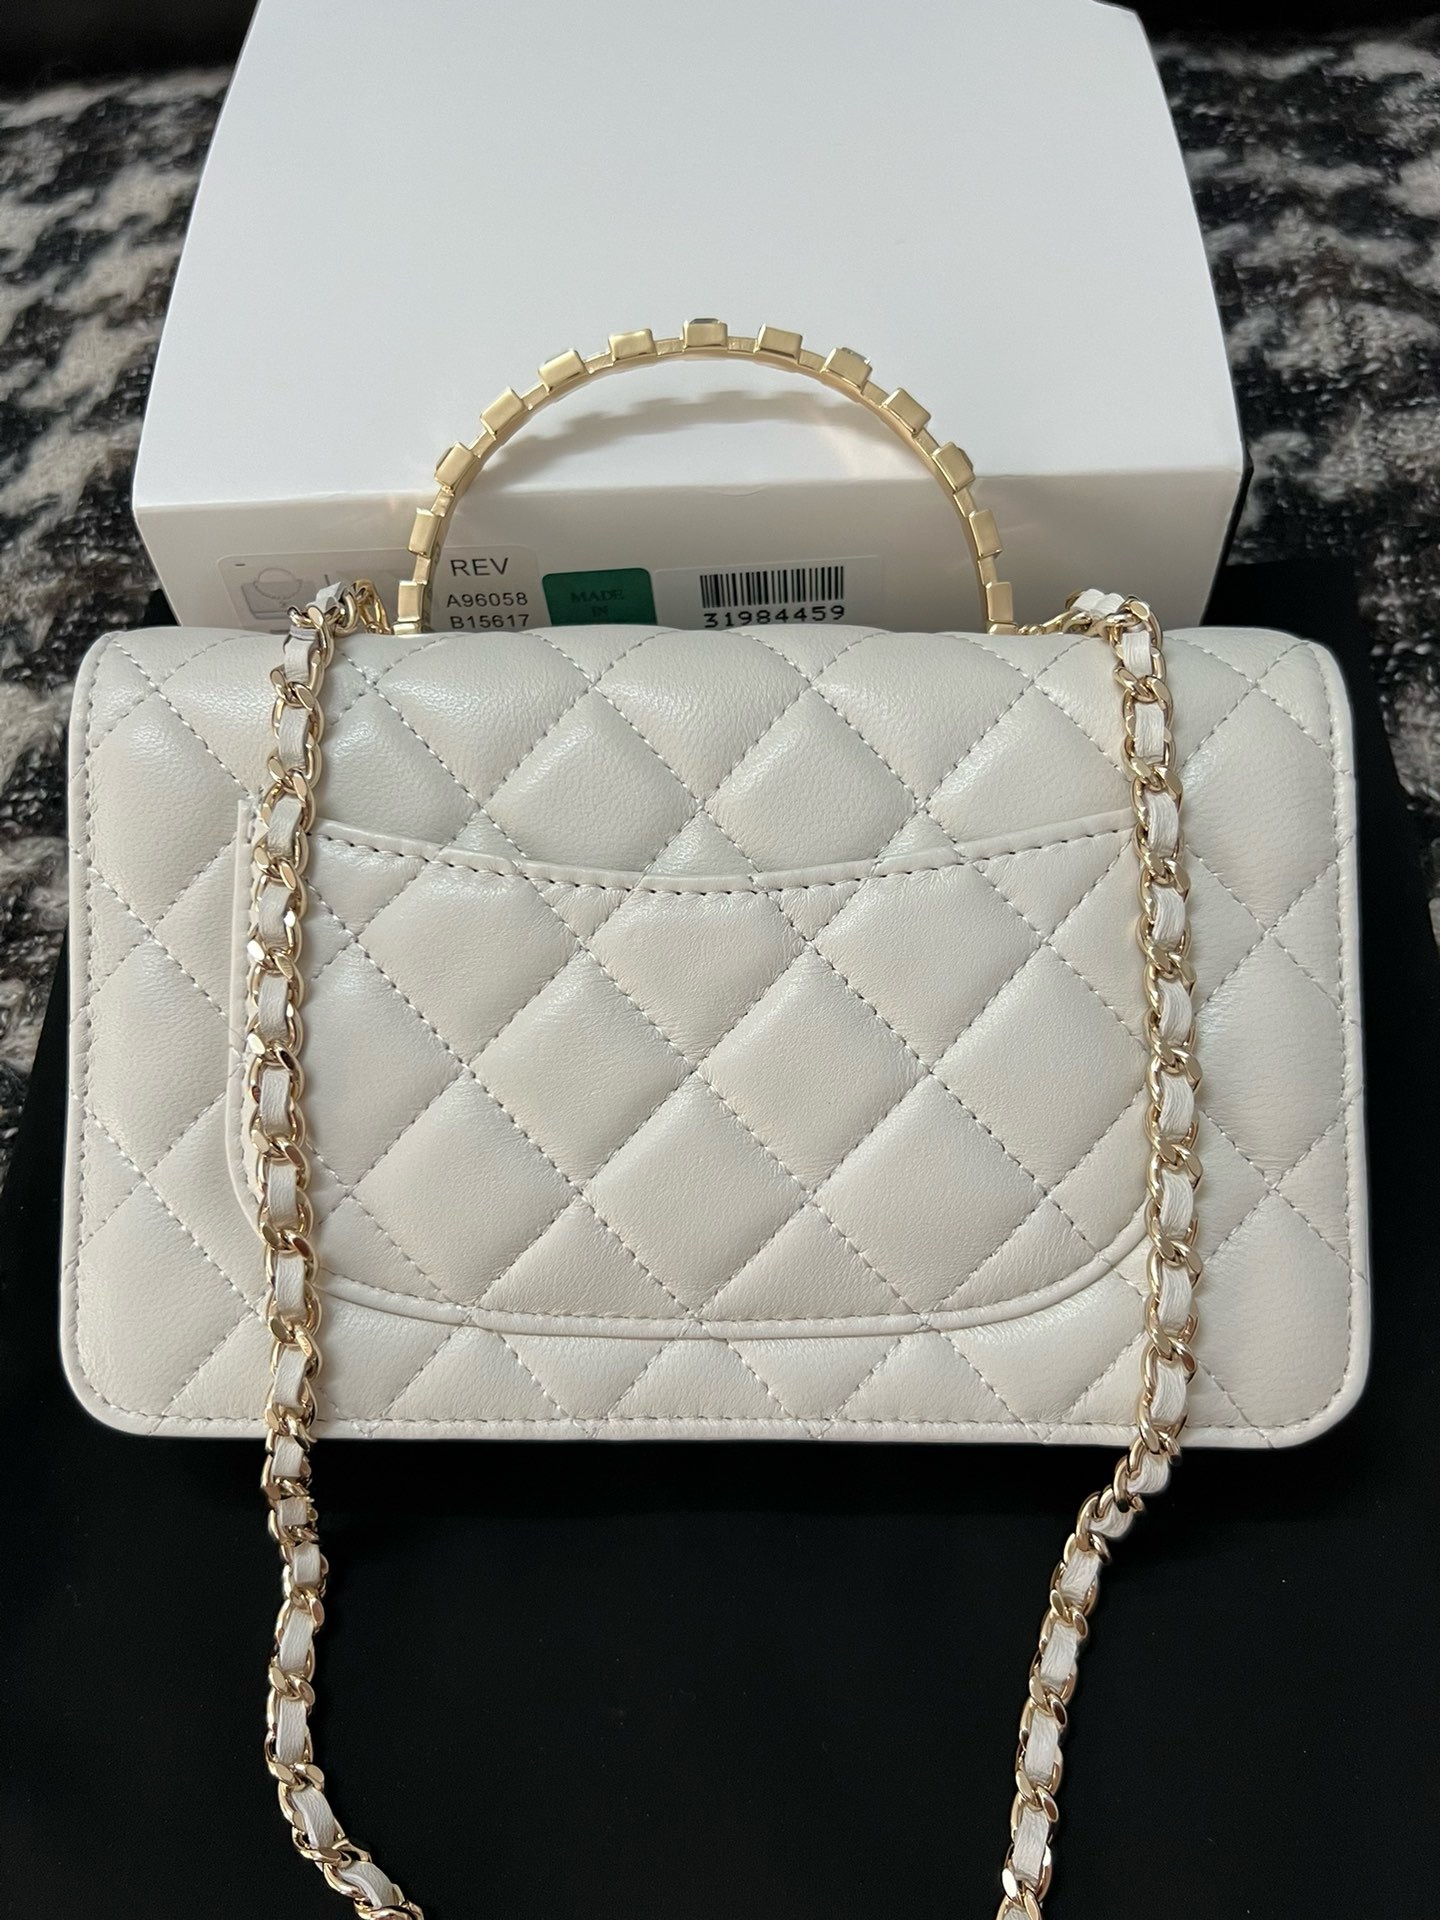 CHANEL FLAP PHONE HOLDER WITH CHAIN AB3566 white